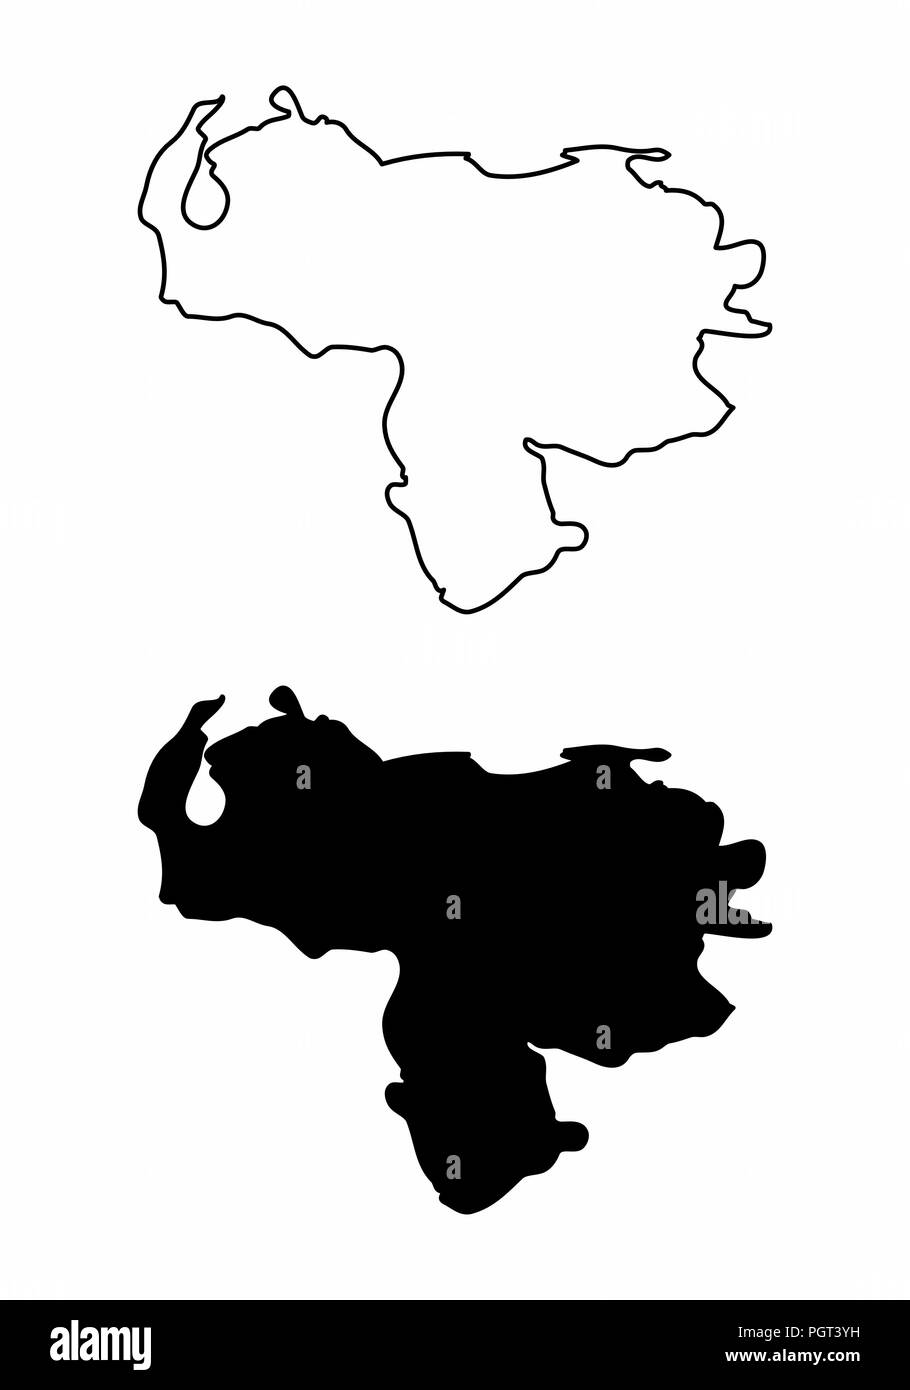 Simplified maps of Venezuela. Black and white outlines. Stock Vector